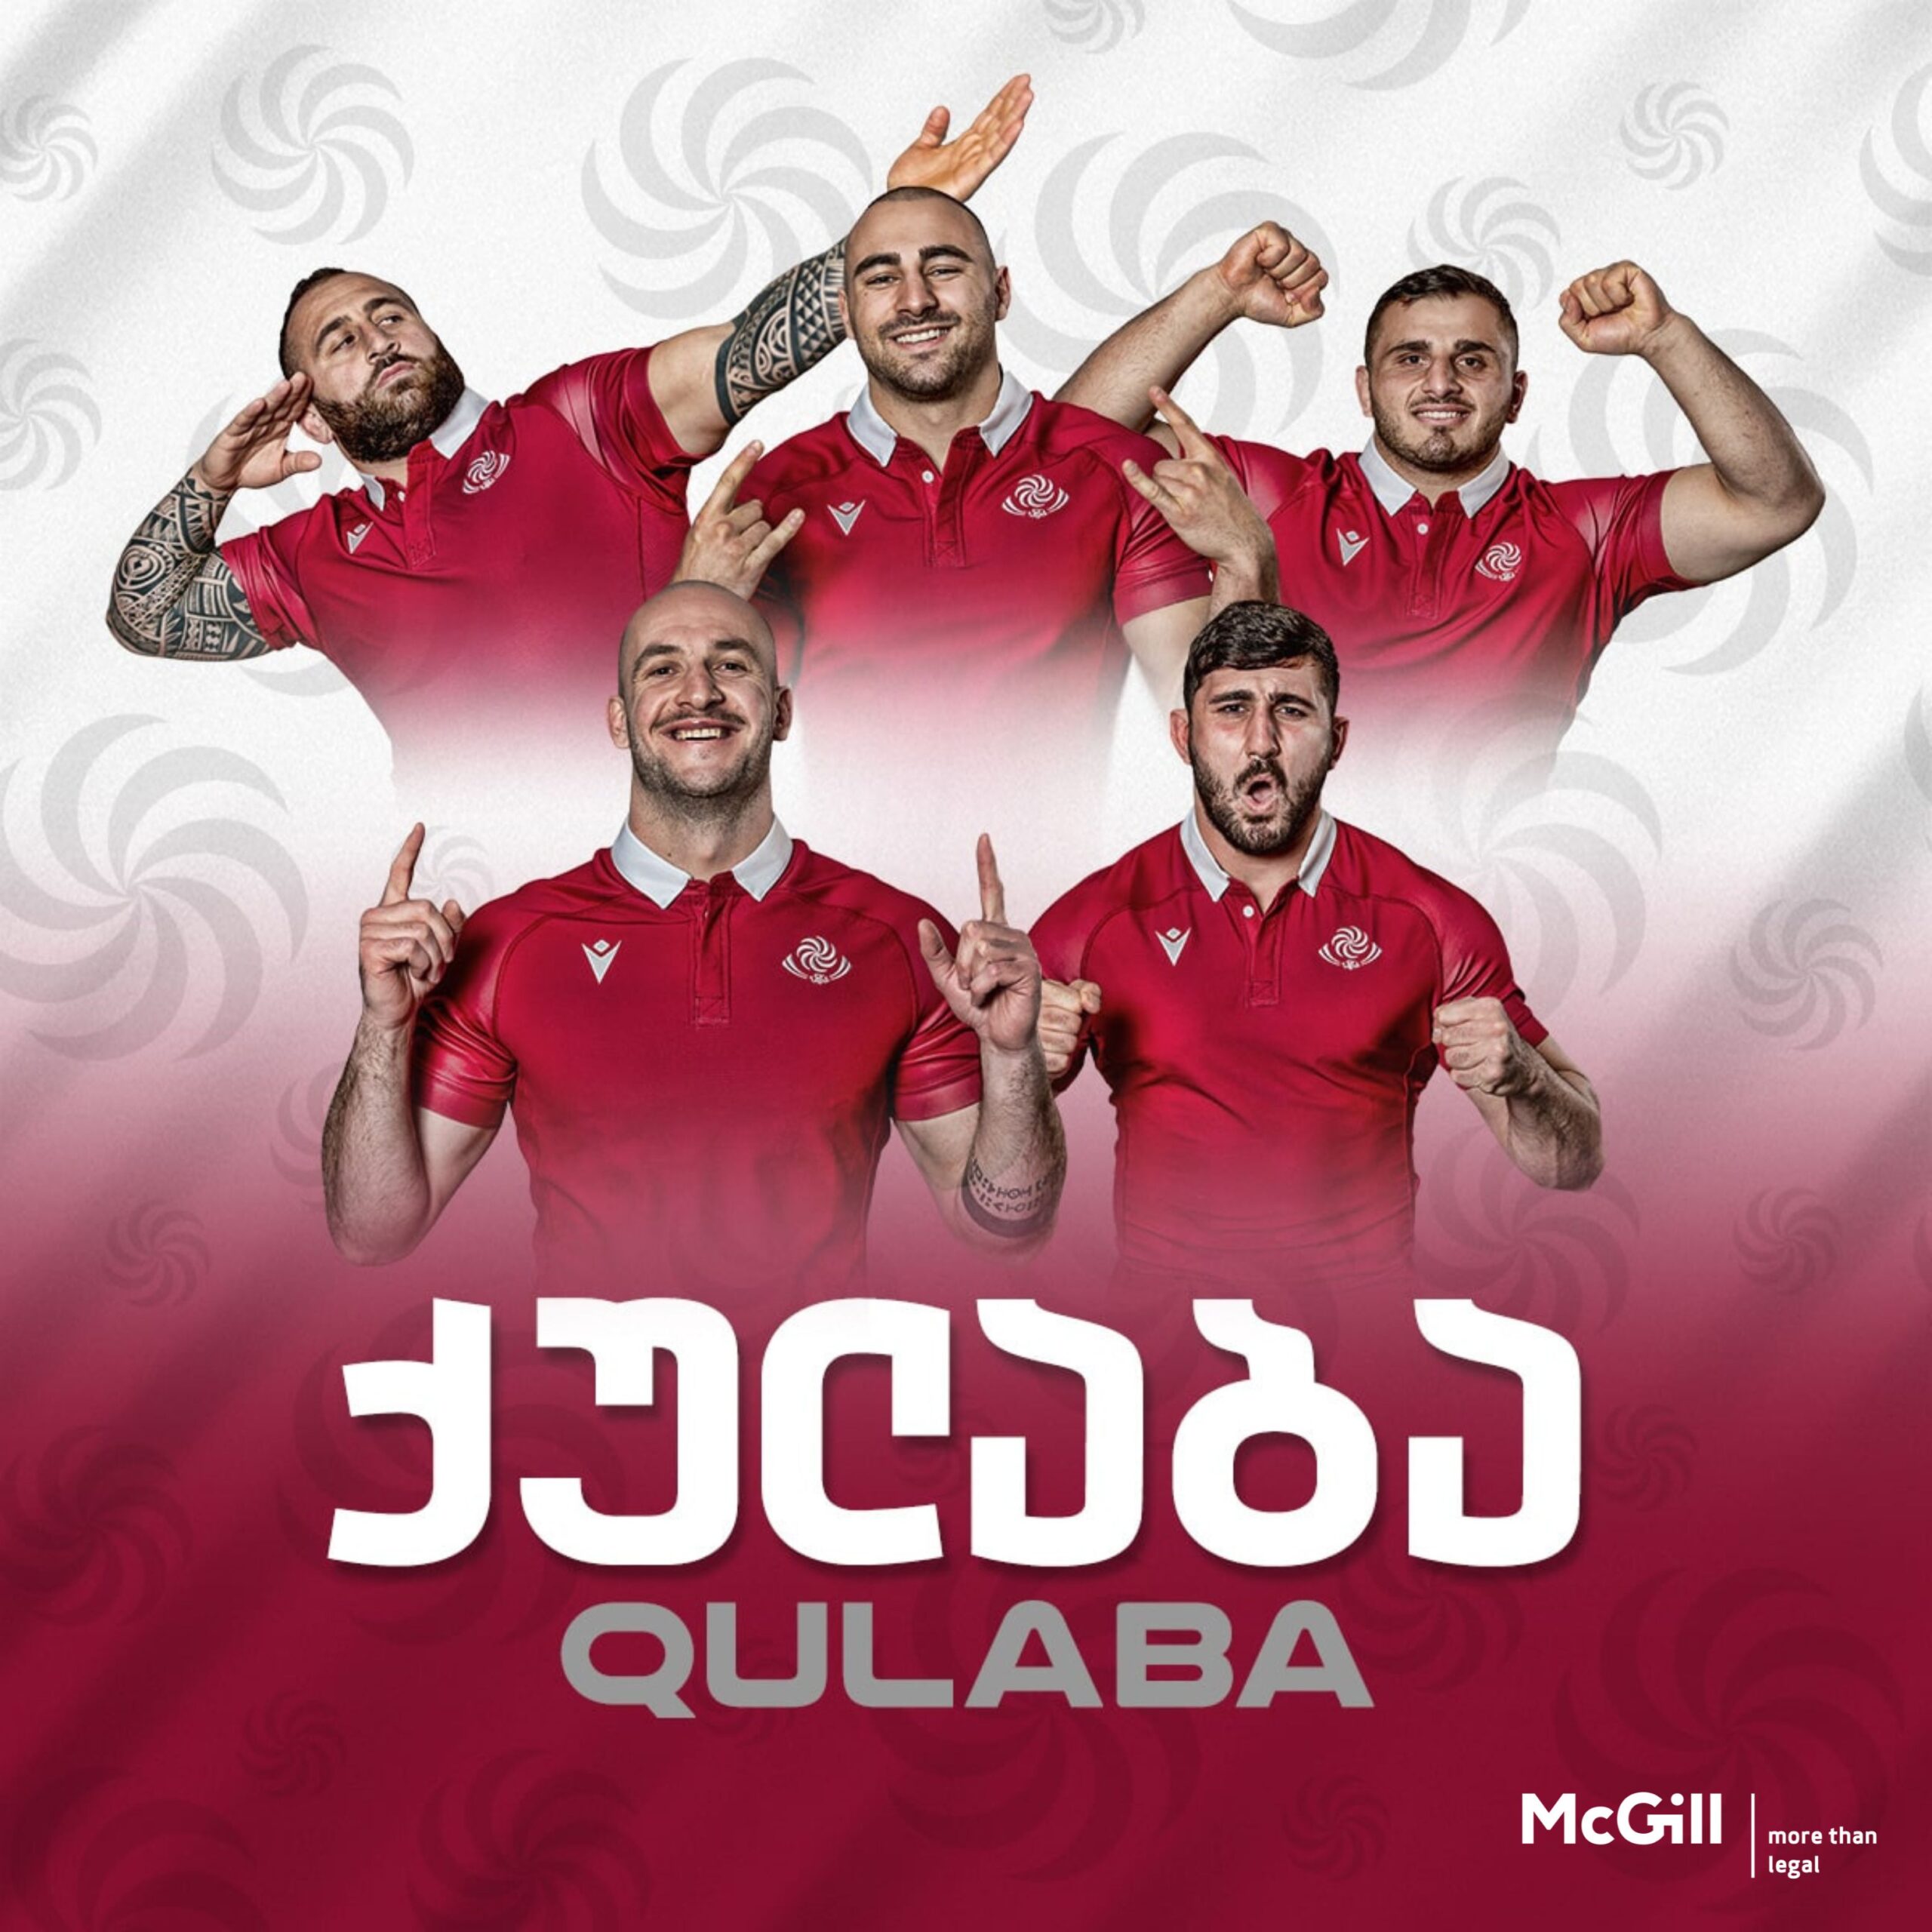 McGill has joined the charity project ‘Qulaba’ by the Georgian Rugby Union